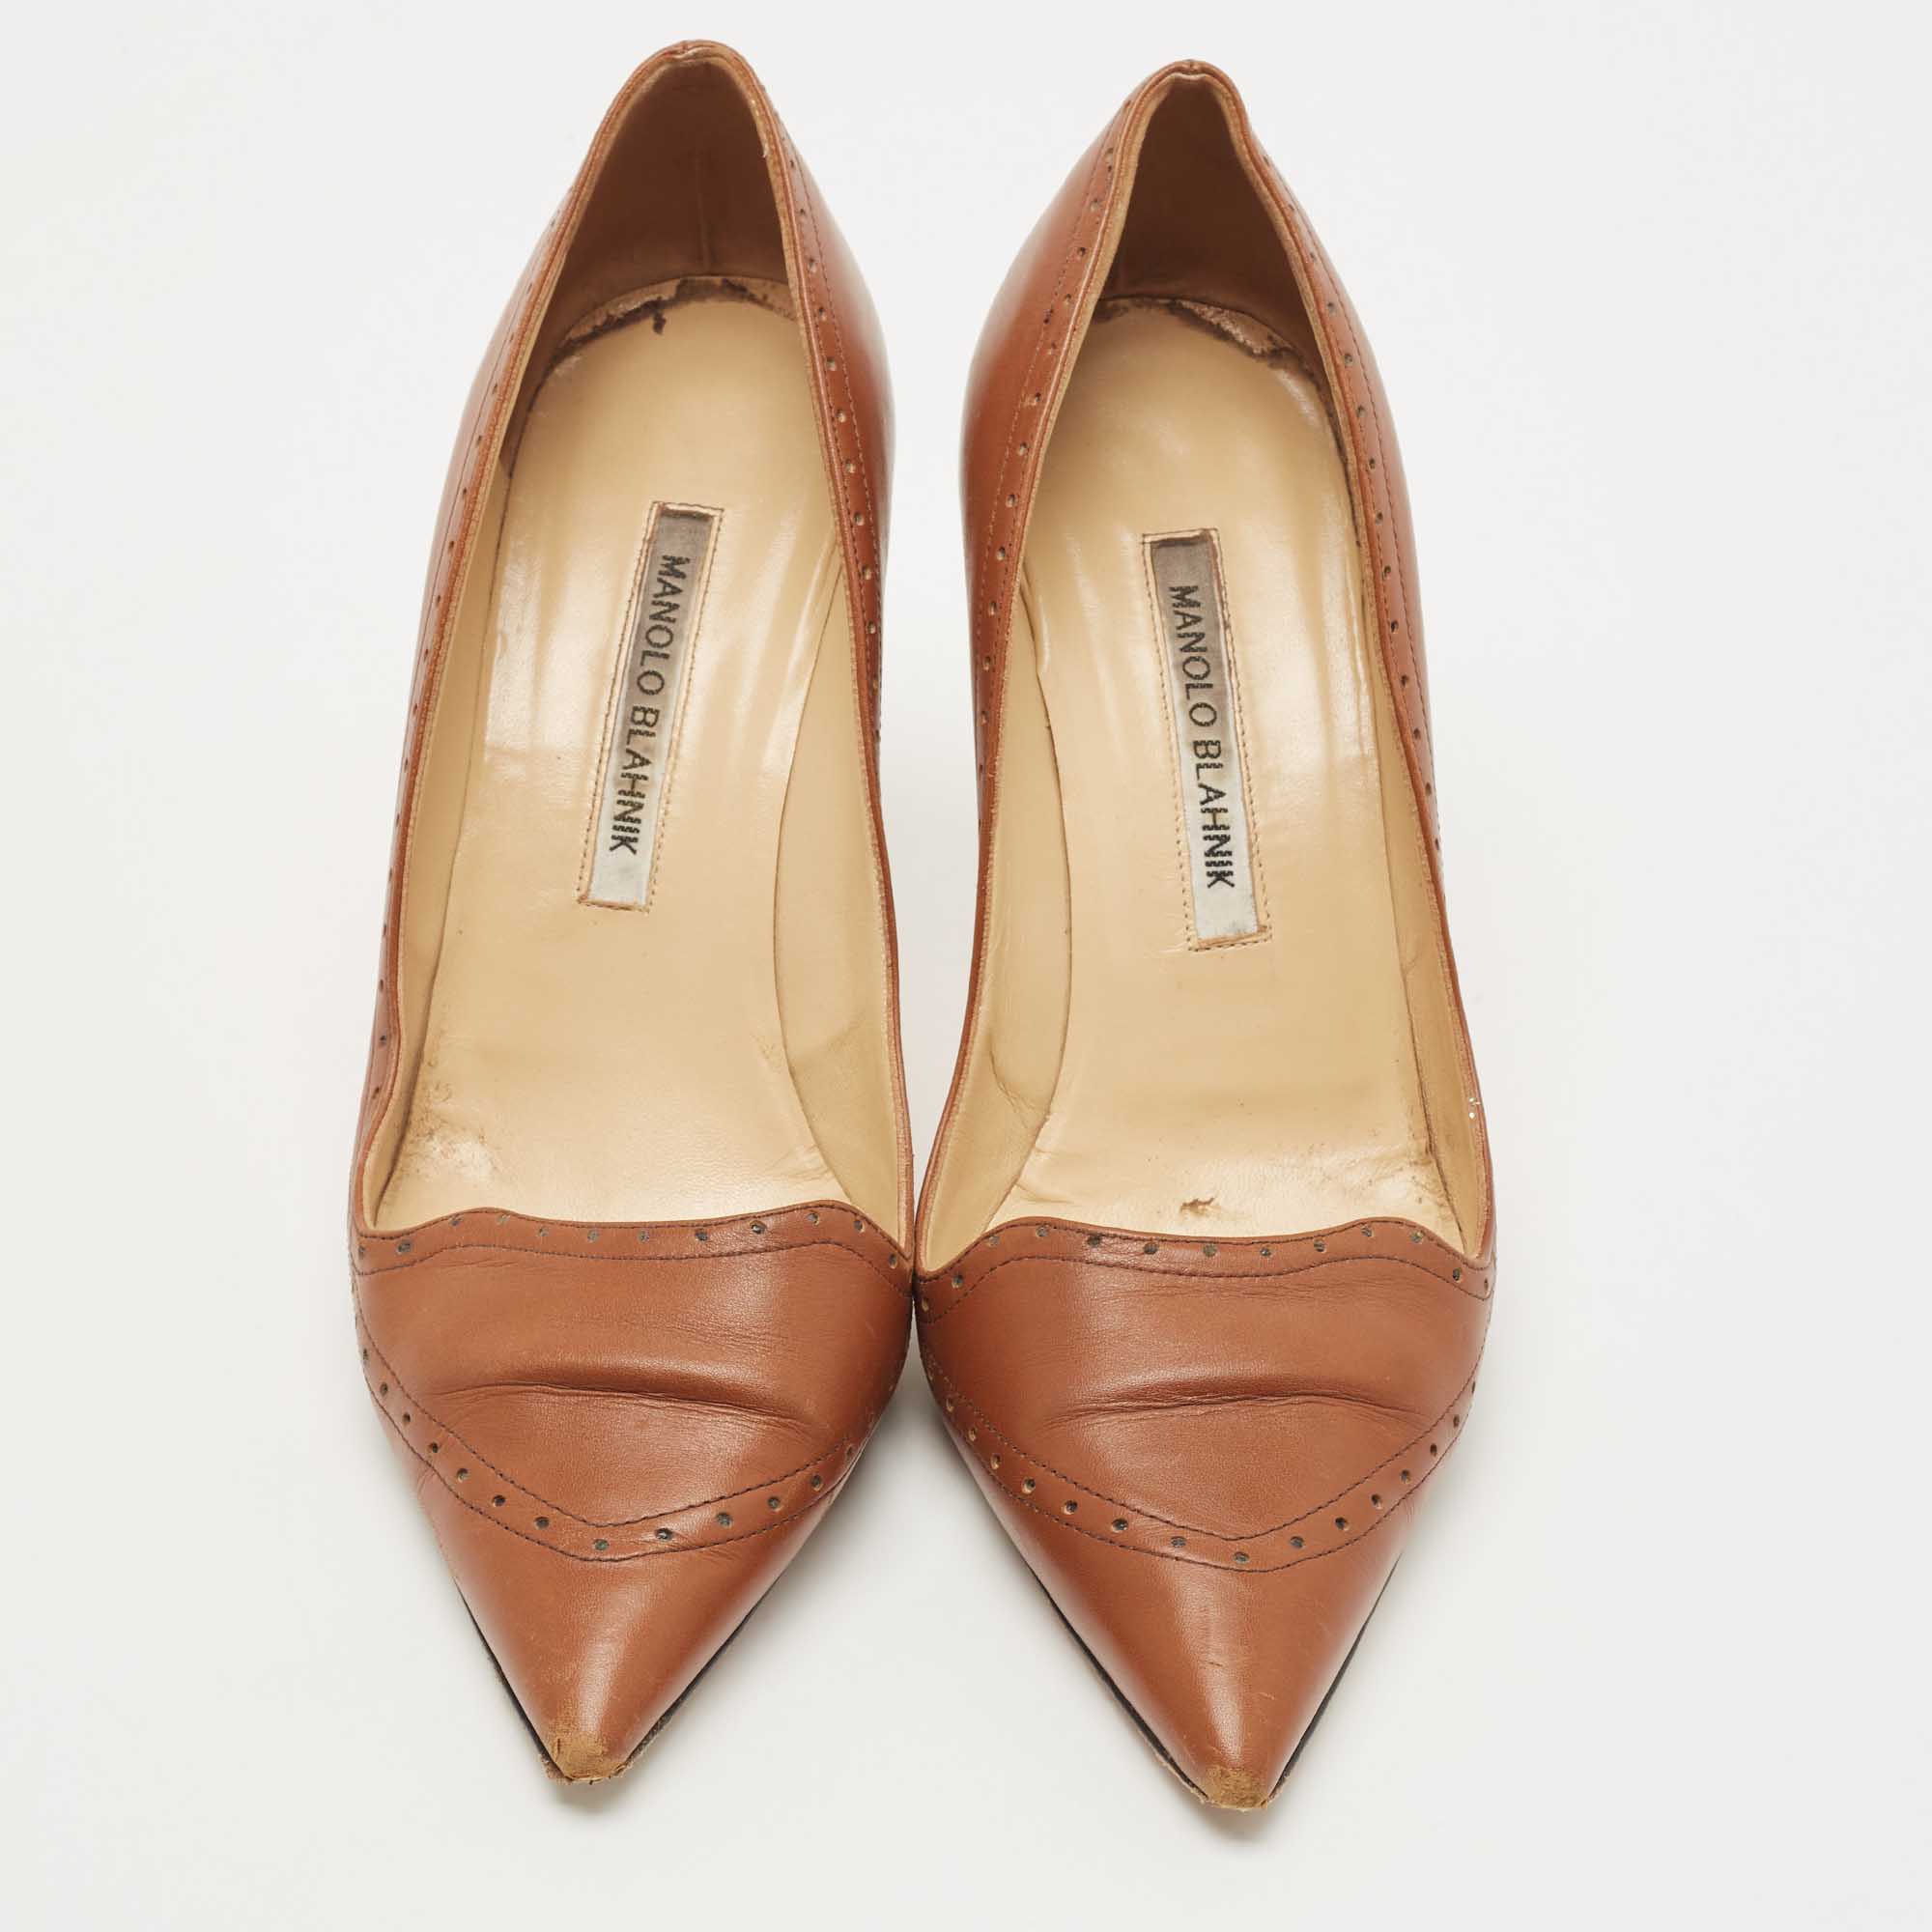 Manolo Blahnik Brown Leather Perforated Pumps Size 39